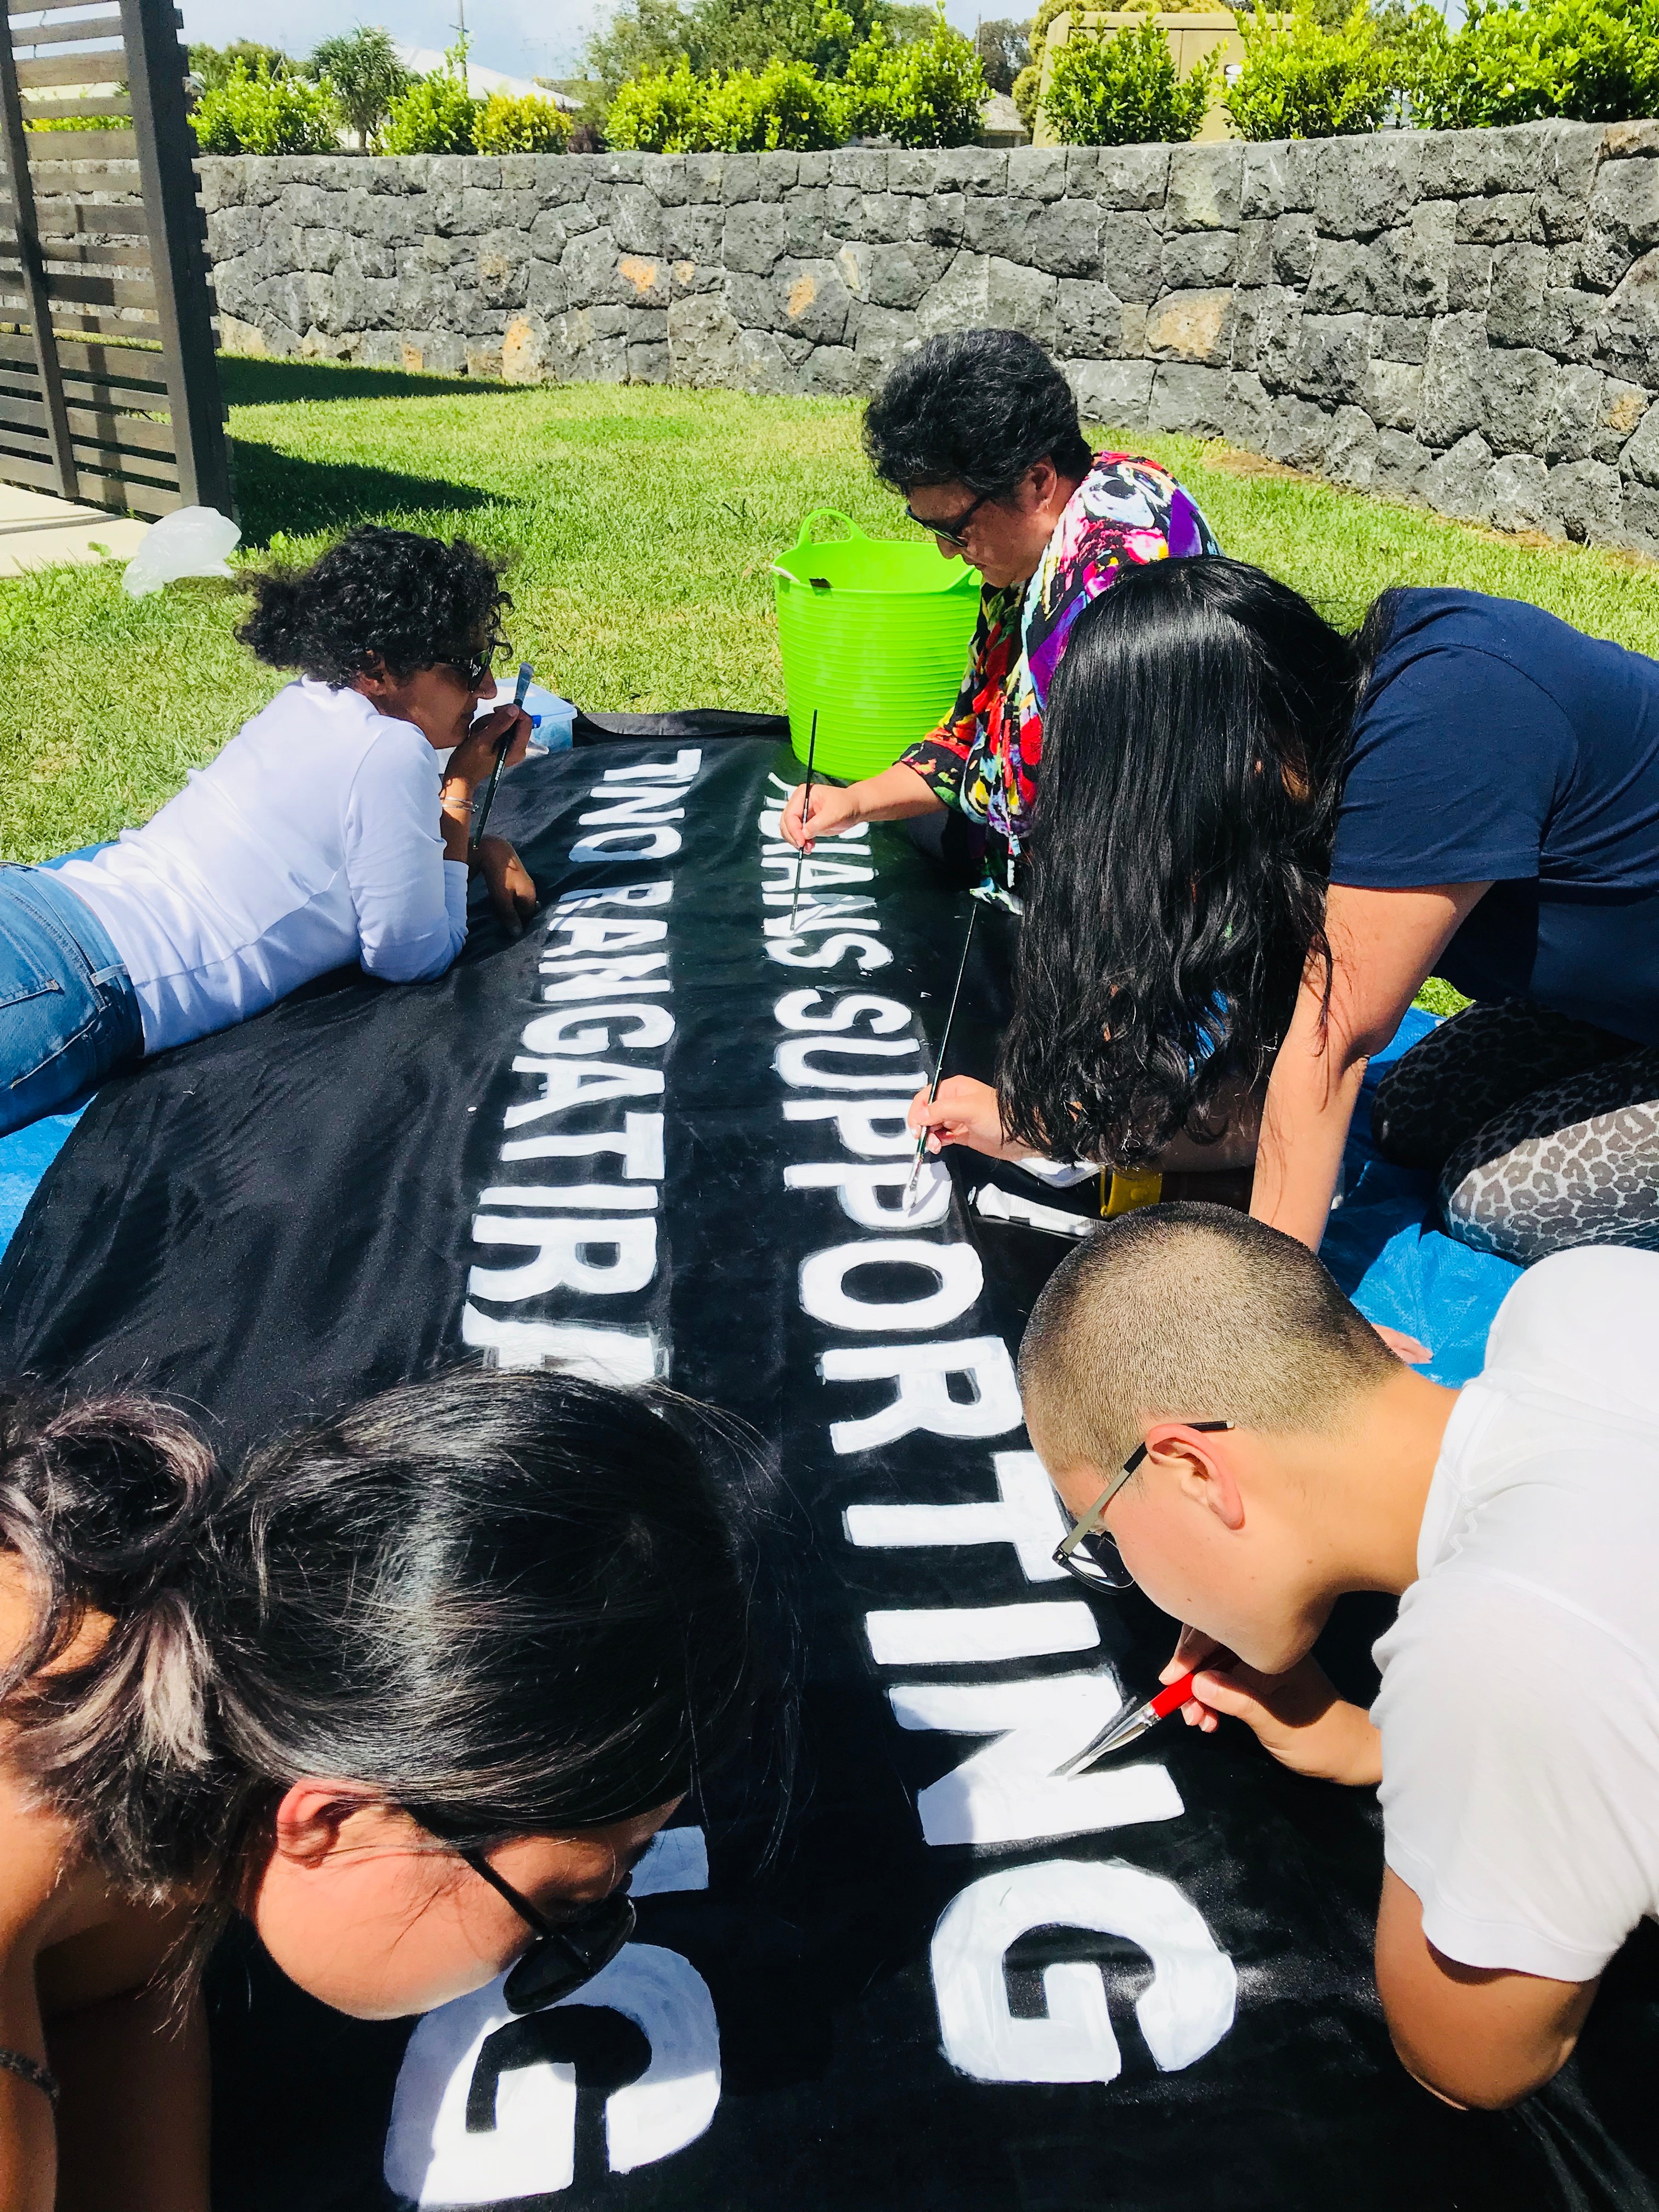 A group of people painting a black banner with white text